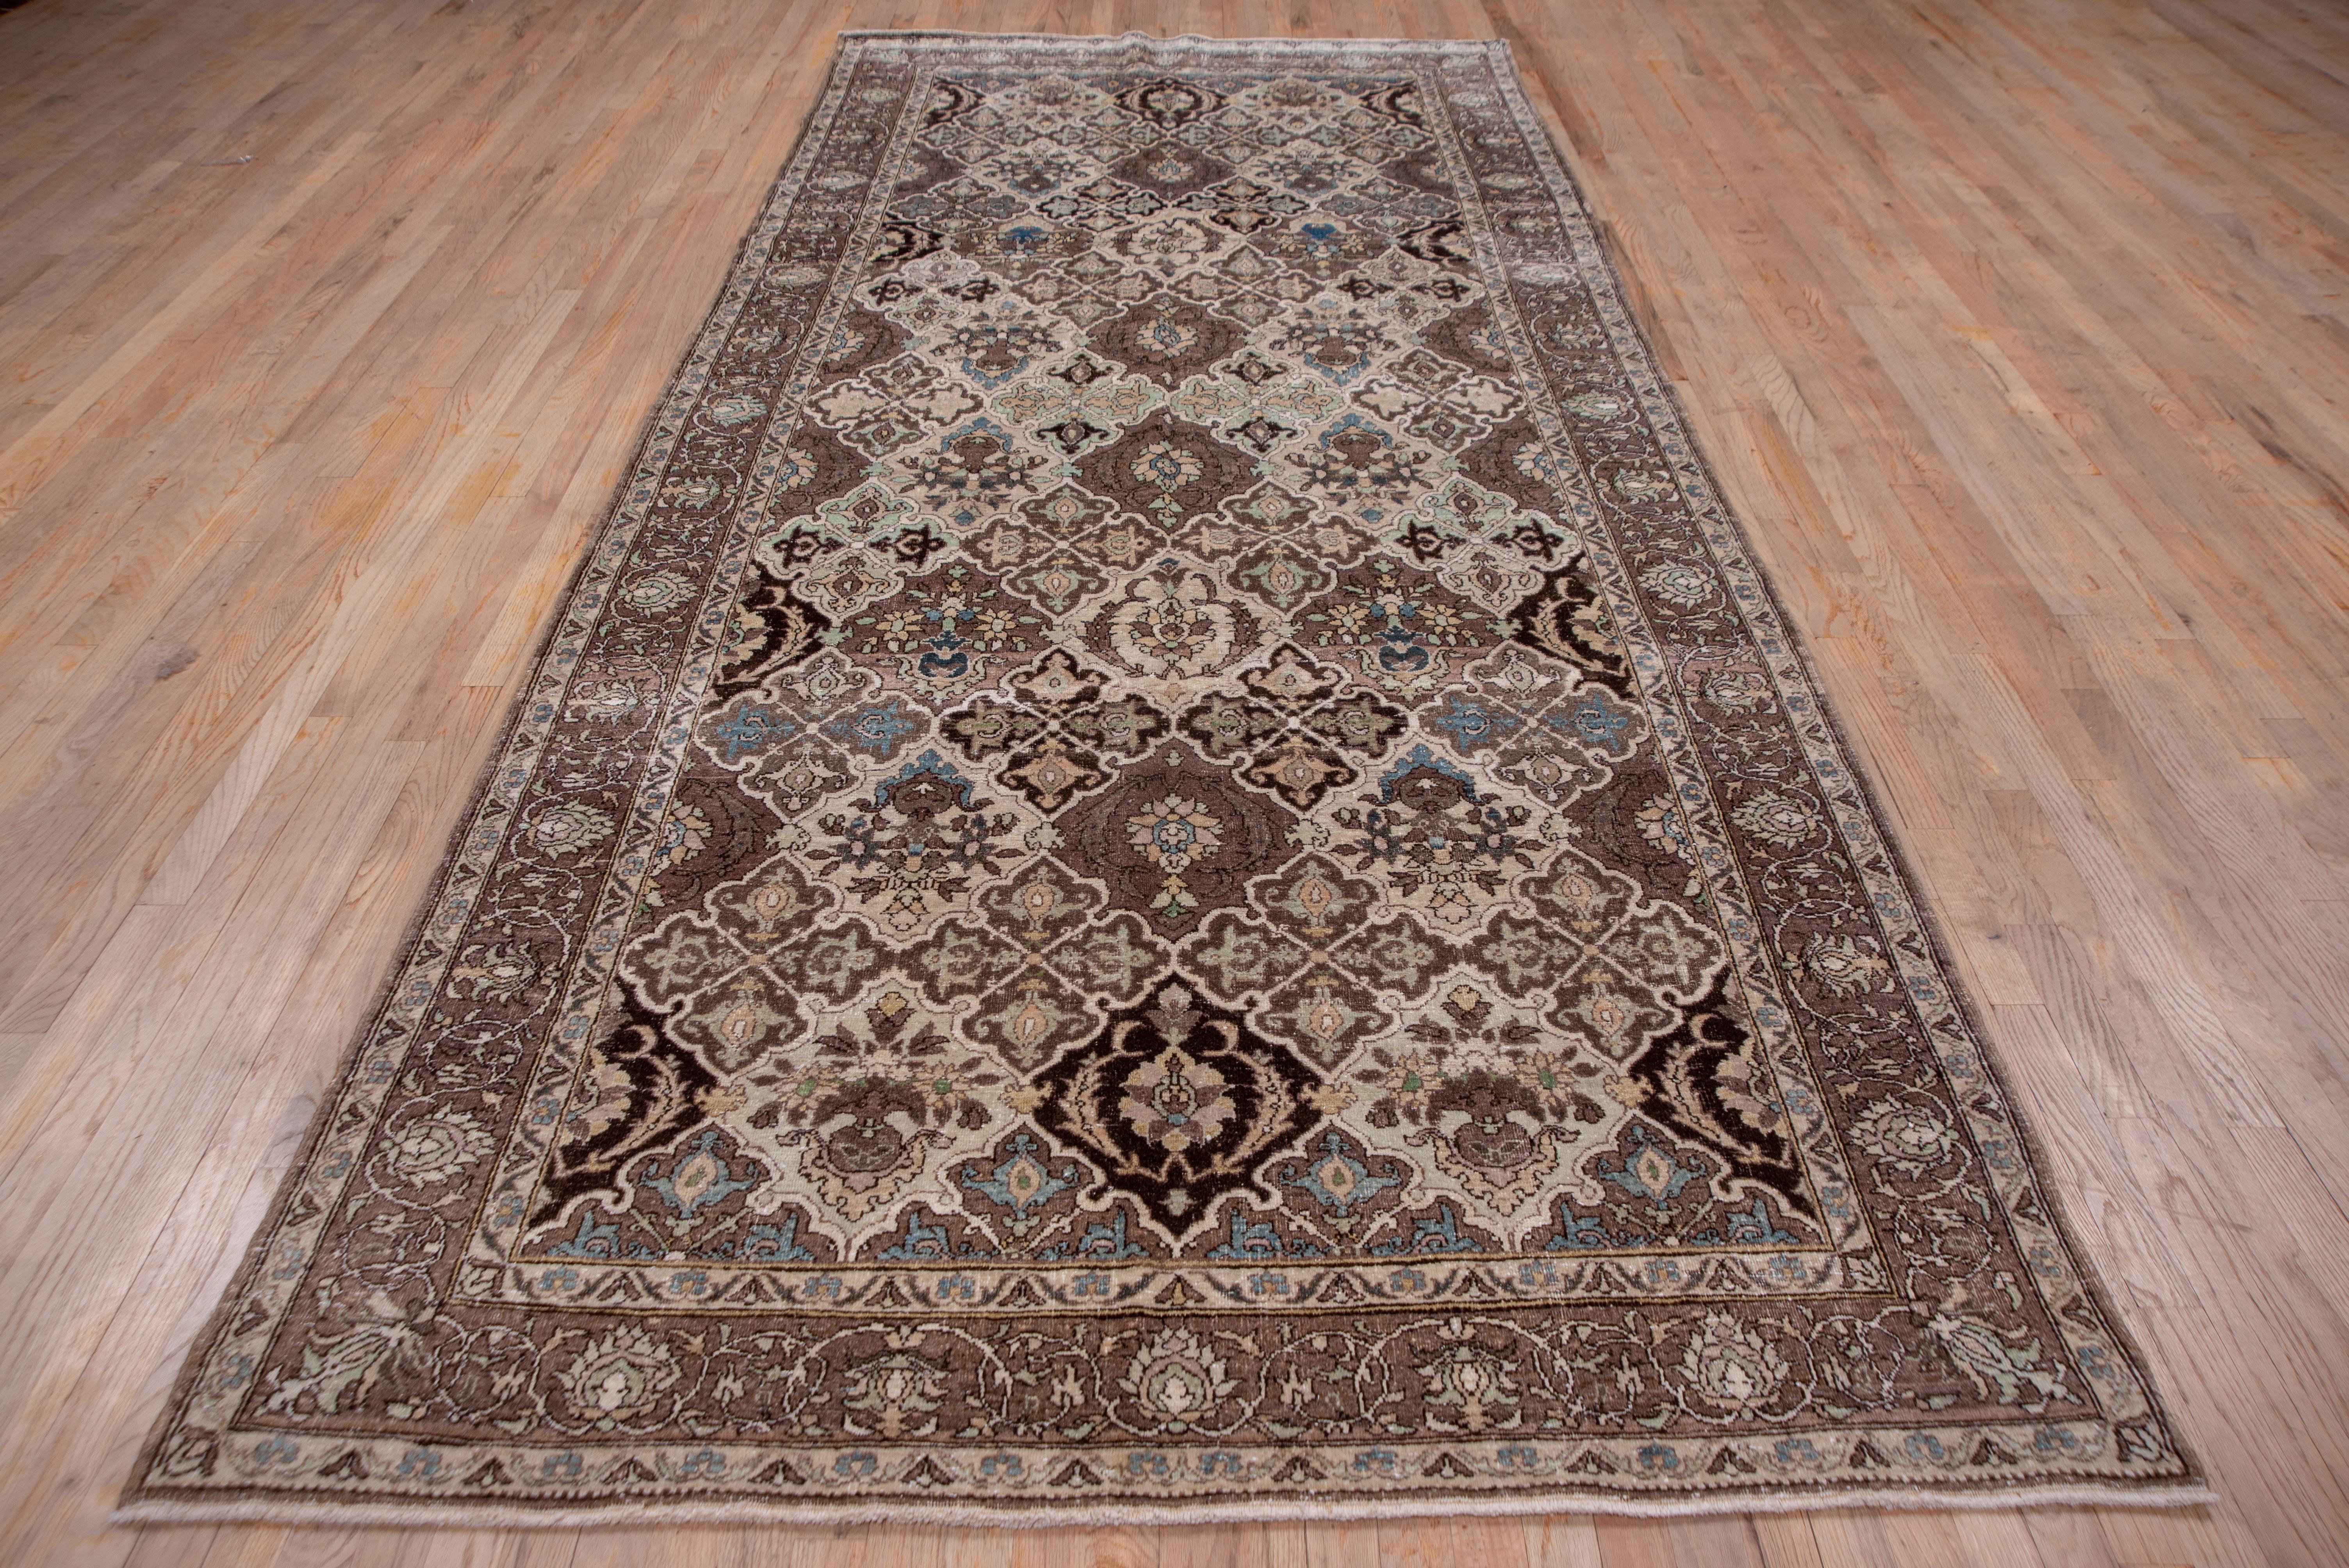 Fine Antique Persian Tabriz Kellegi Rug, Brown Palette, Seafoam & Blue Accents In Good Condition For Sale In New York, NY